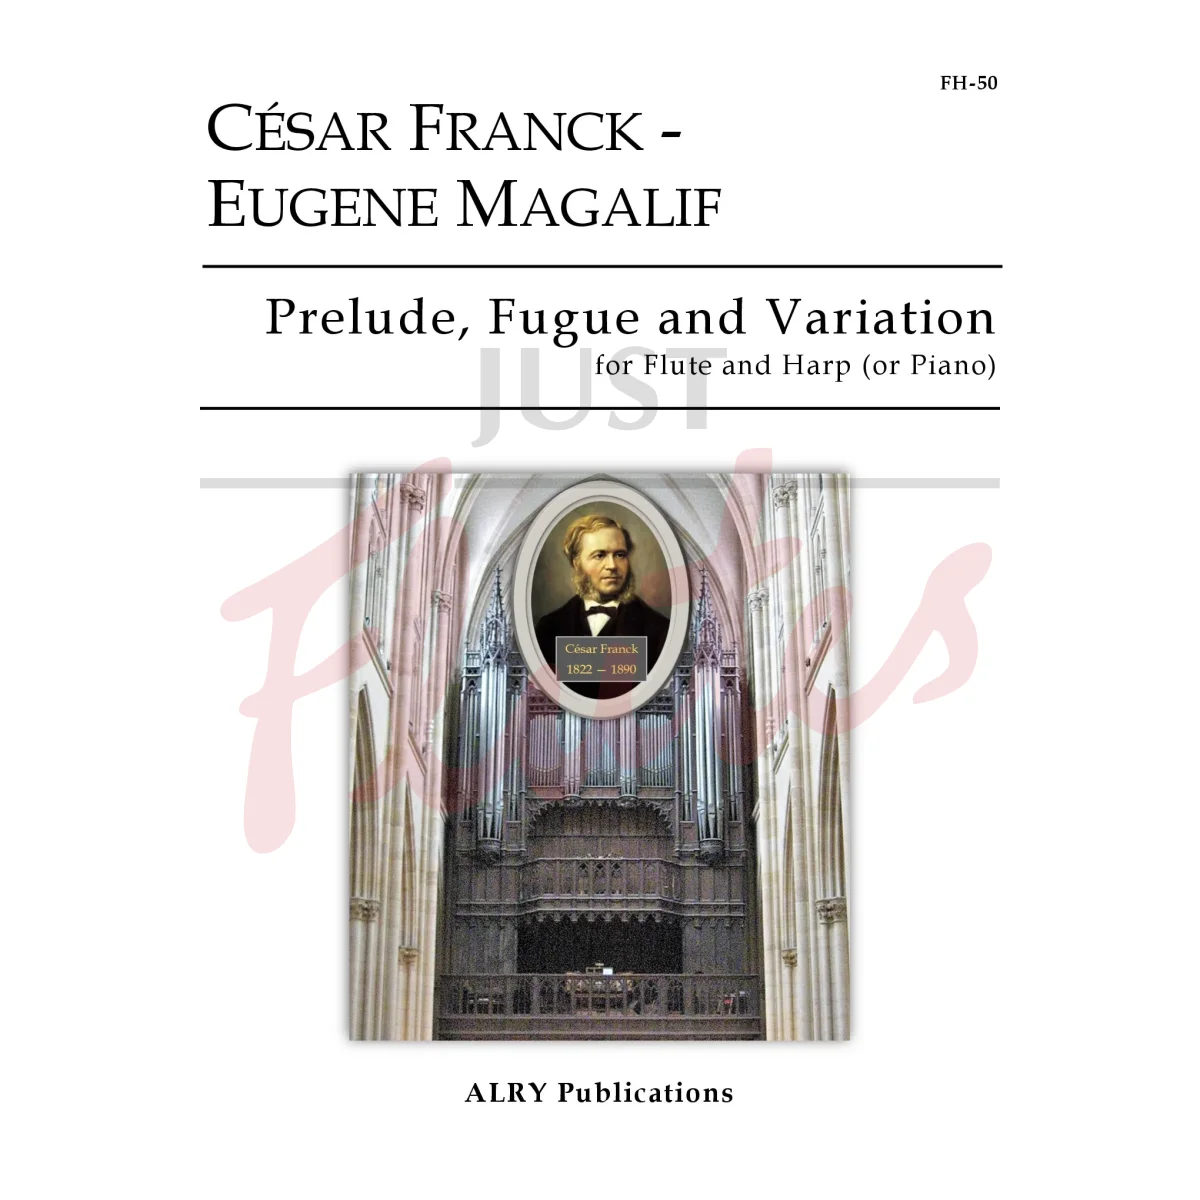 Prelude, Fugue and Variation for Flute and Harp (or Piano)